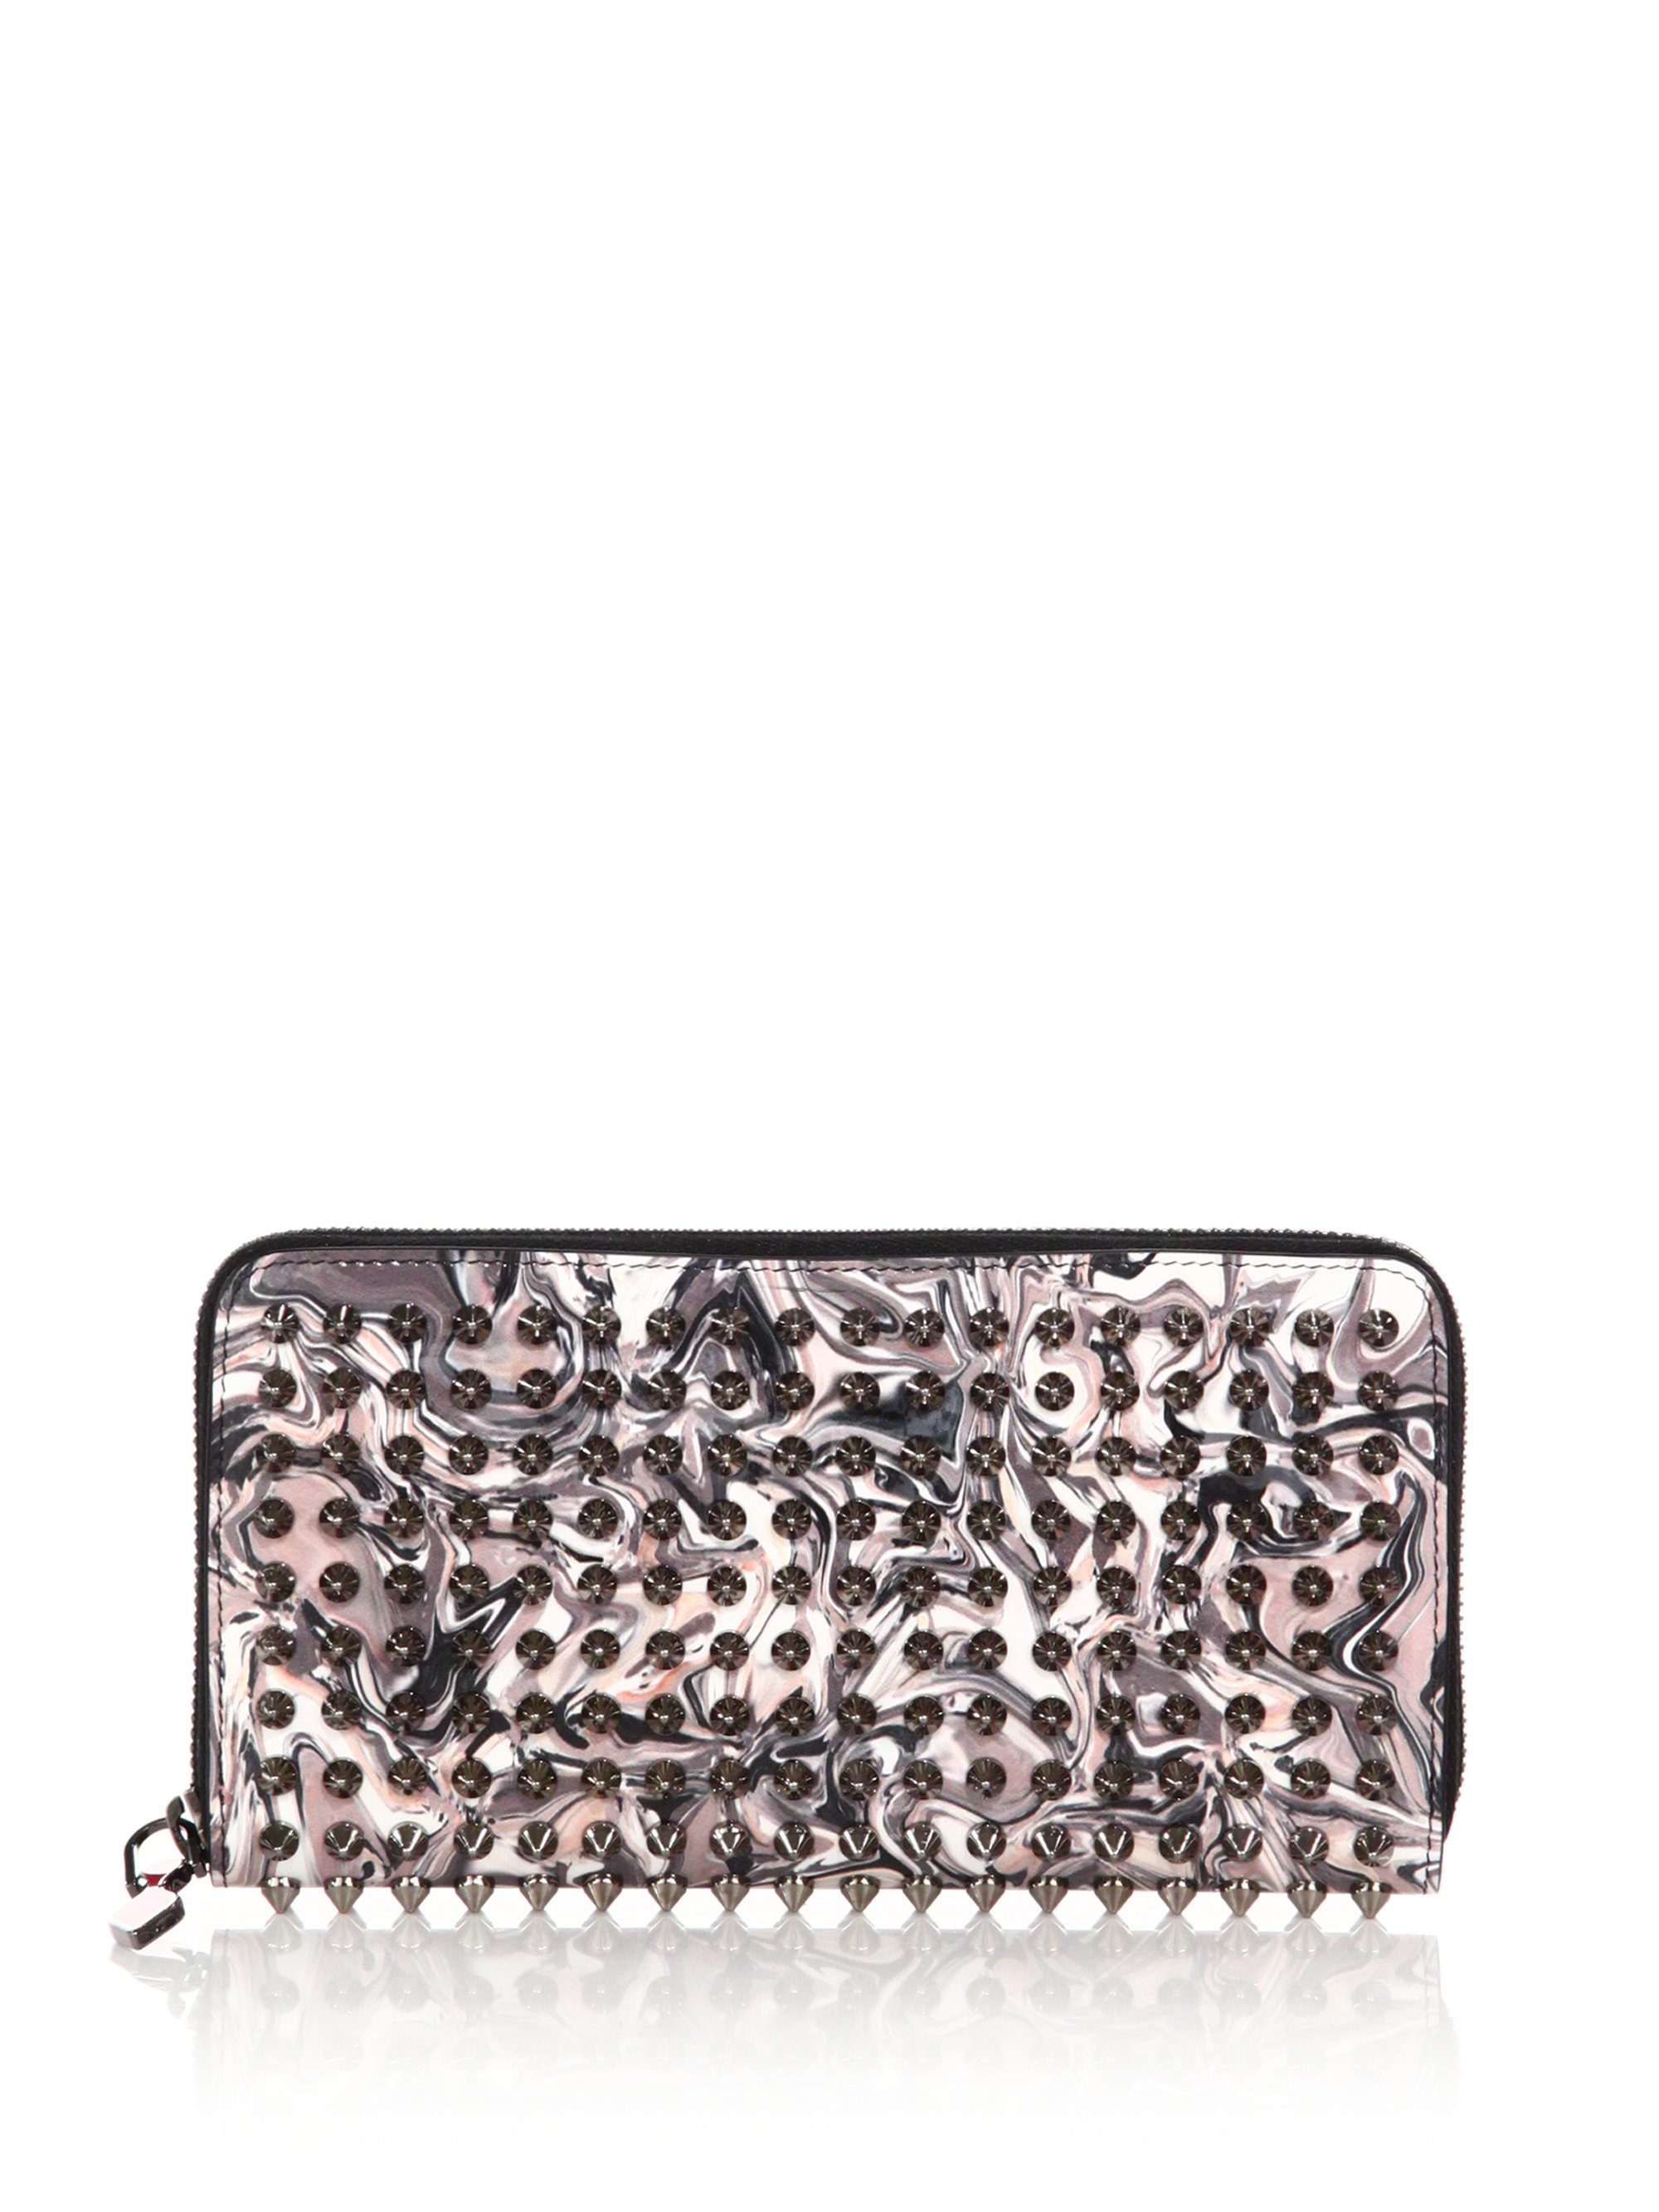 christian louboutin panettone spike studded continental wallet ...